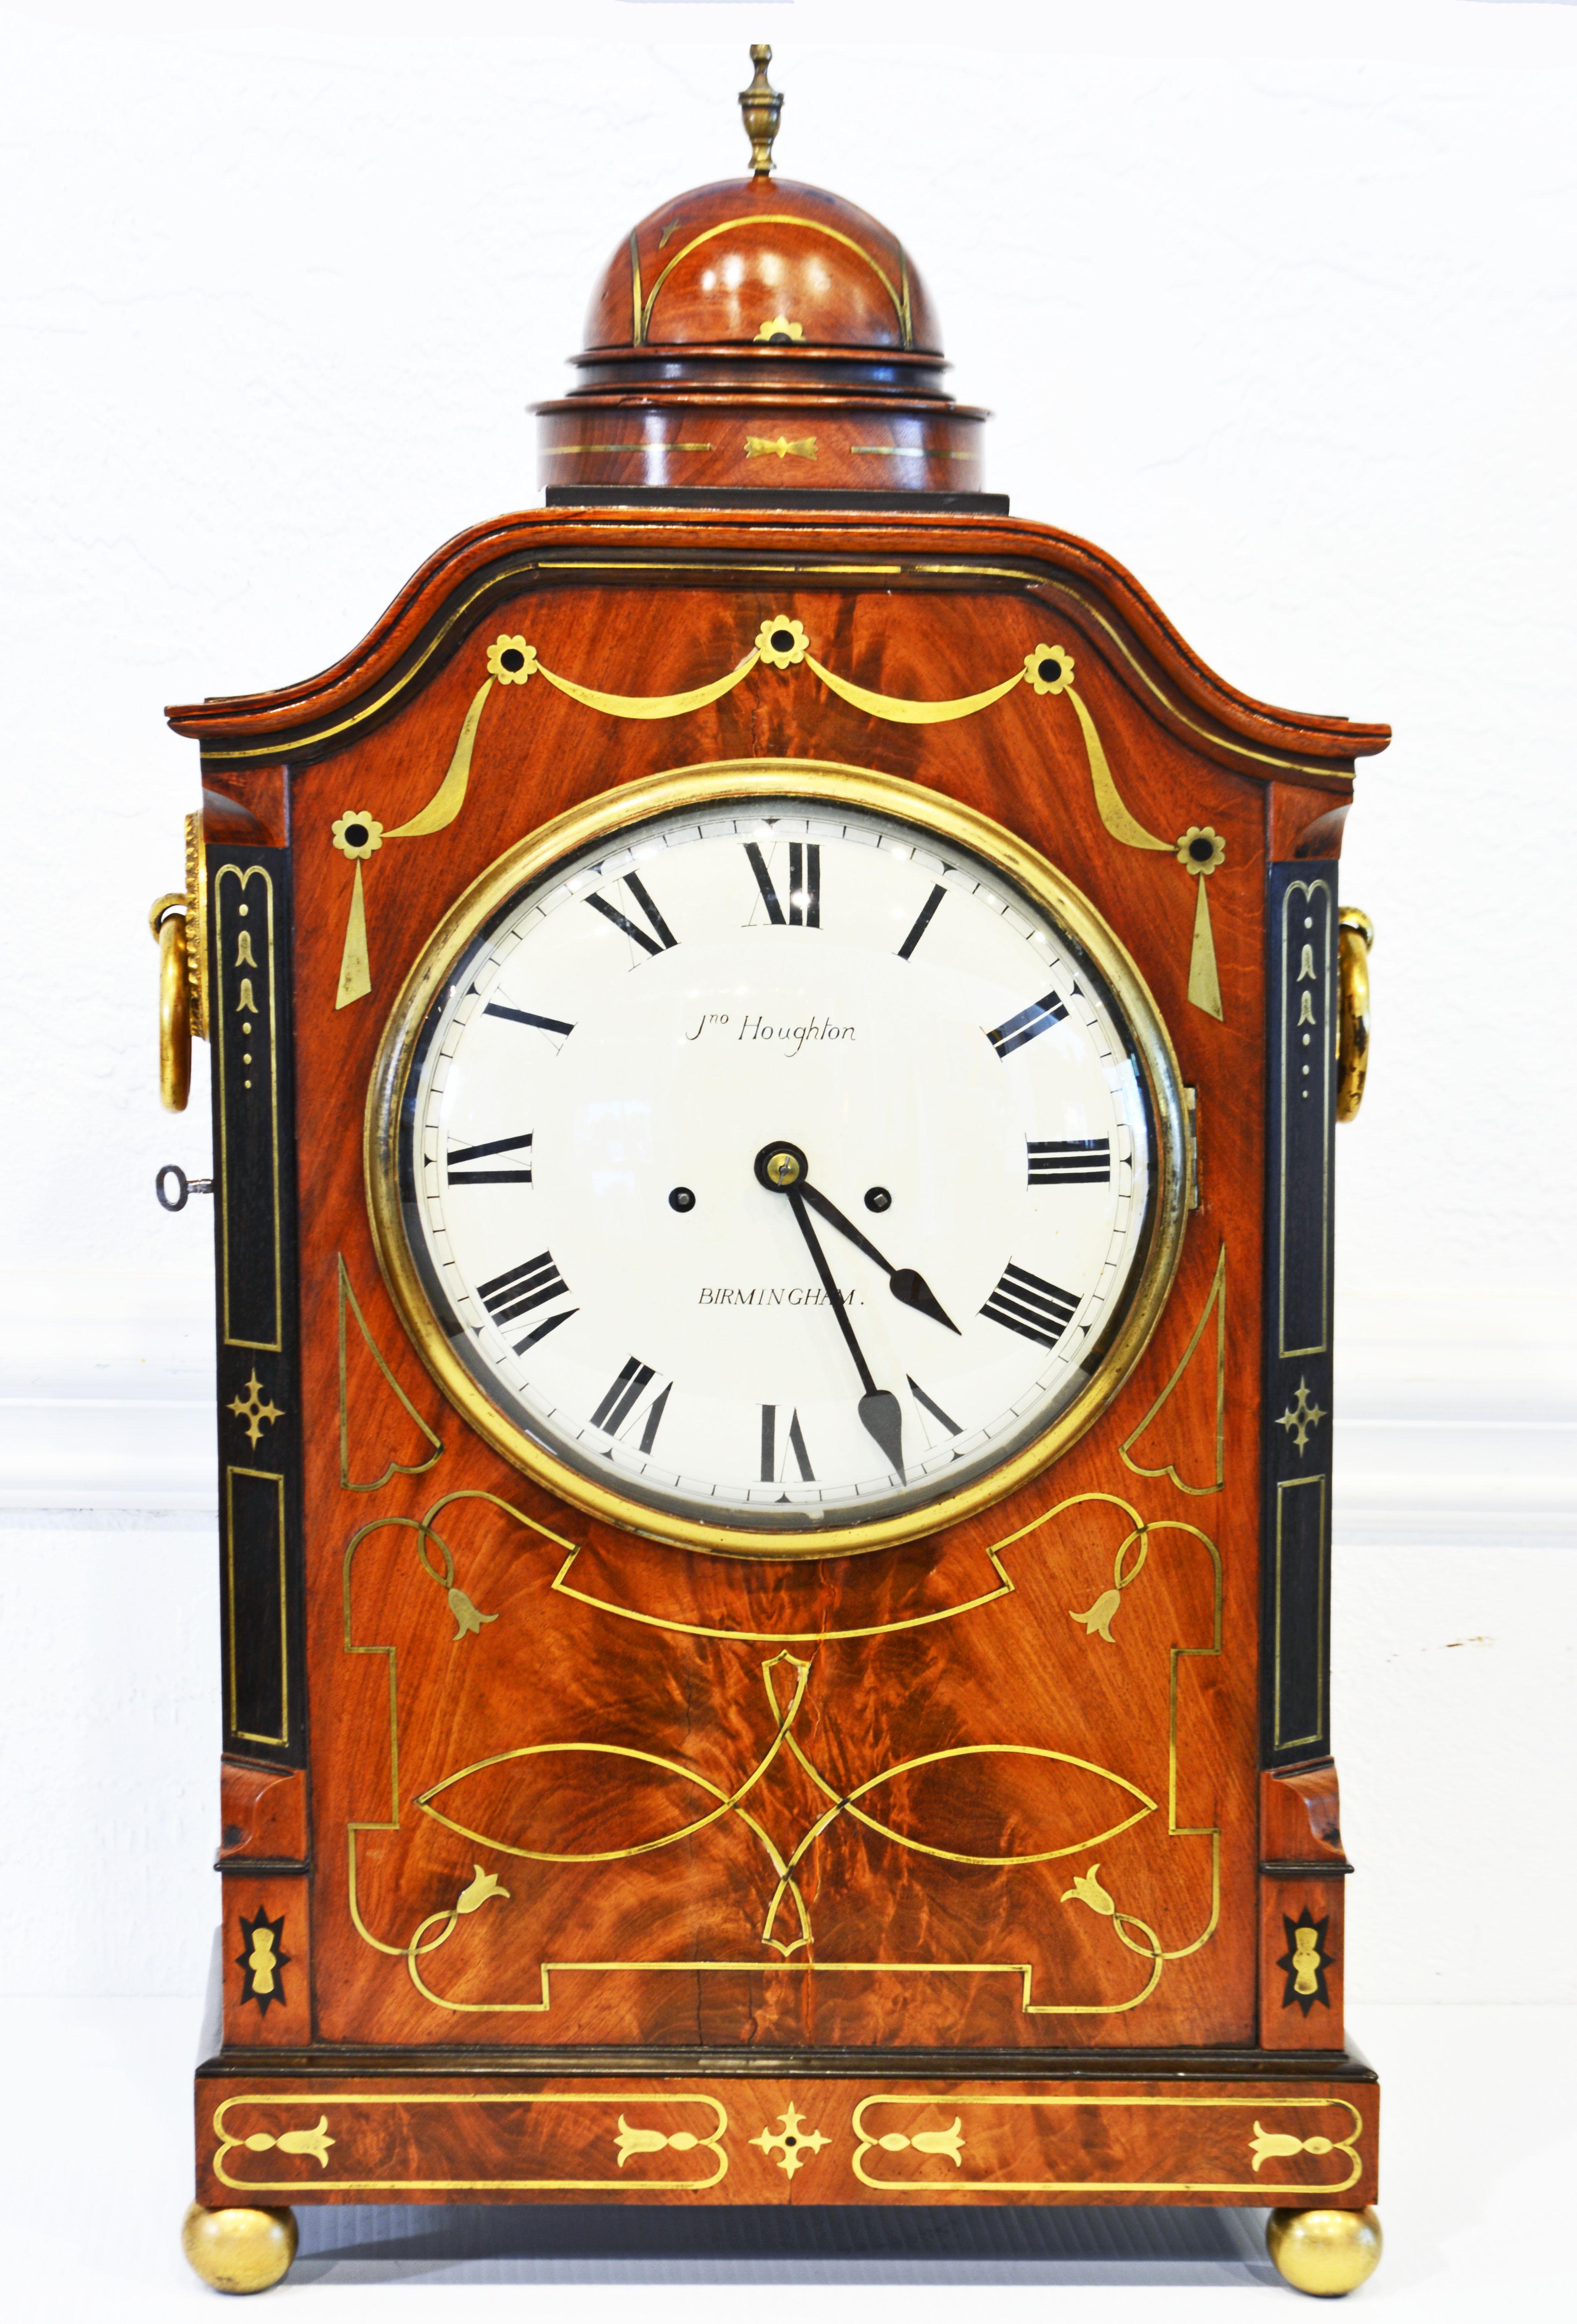 Regency Domed and Brass Inlaid Mantel Clock by Houghton Birmingham, Circa 1830 7